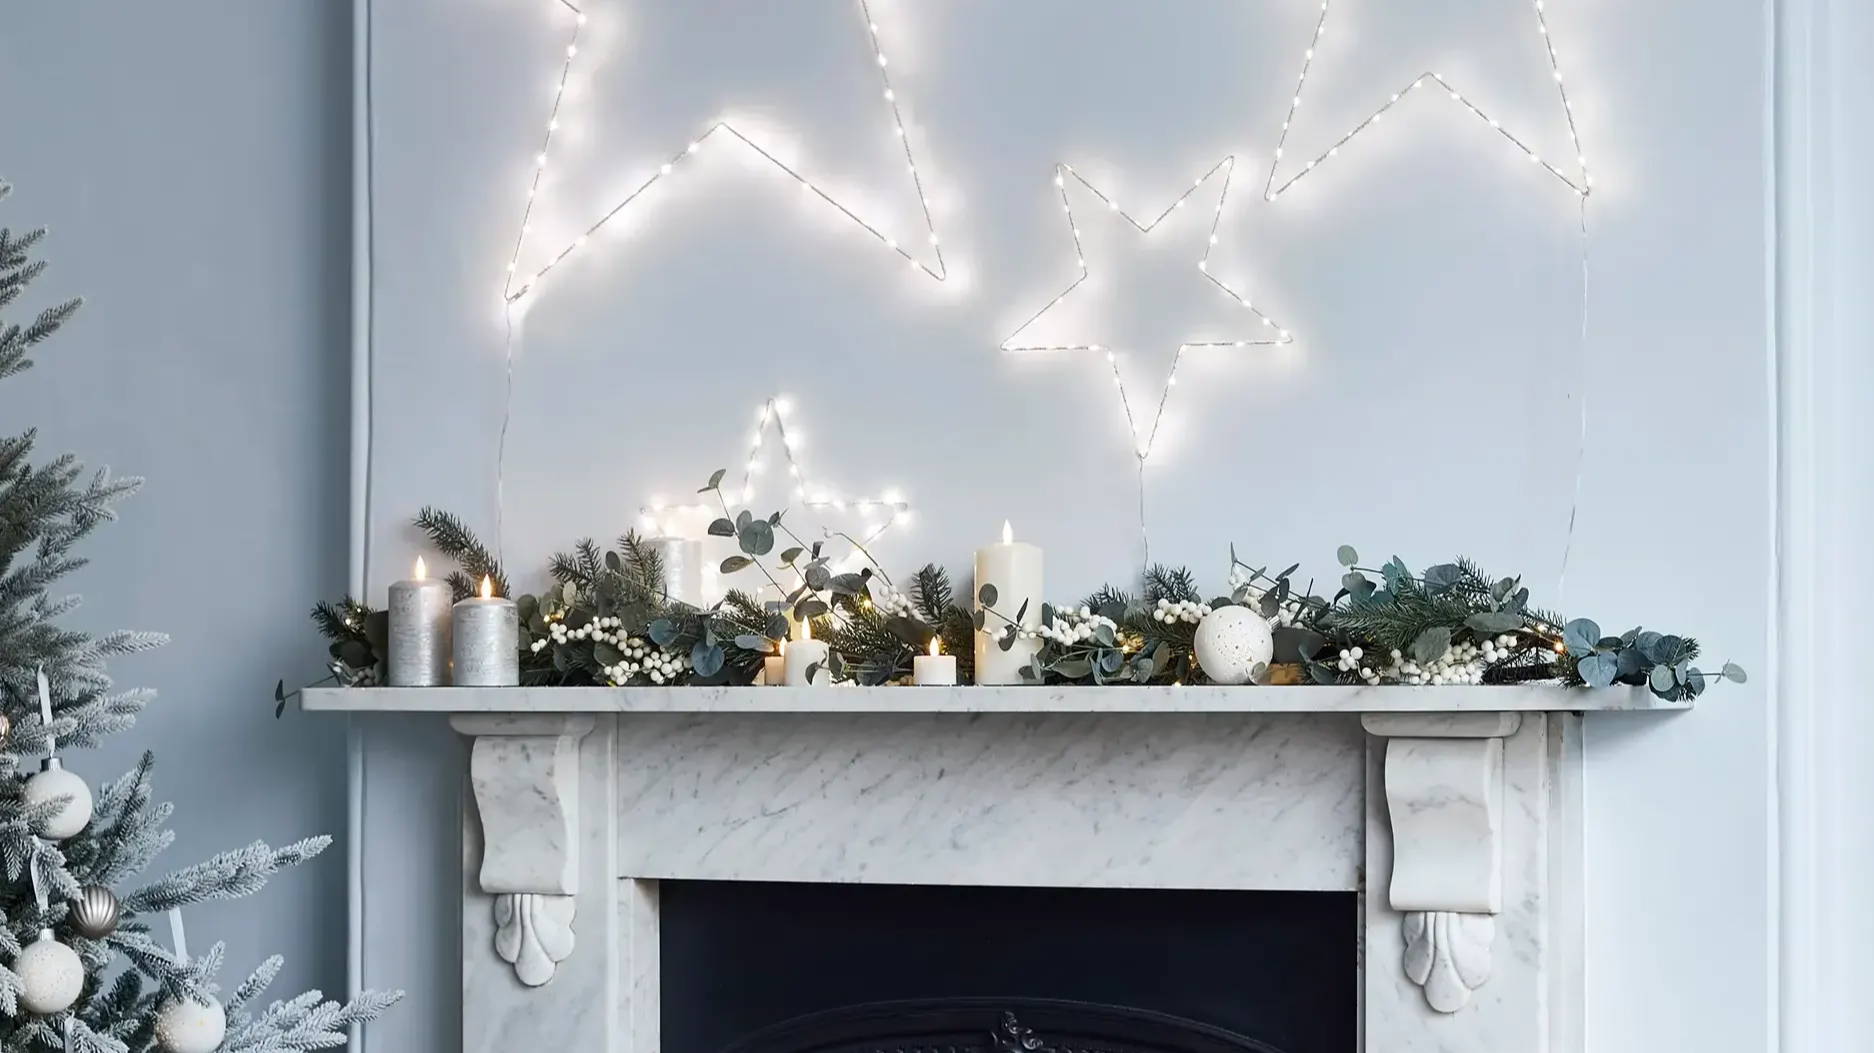 Mantle piece with a garland and candles and a trio of star lights above. 